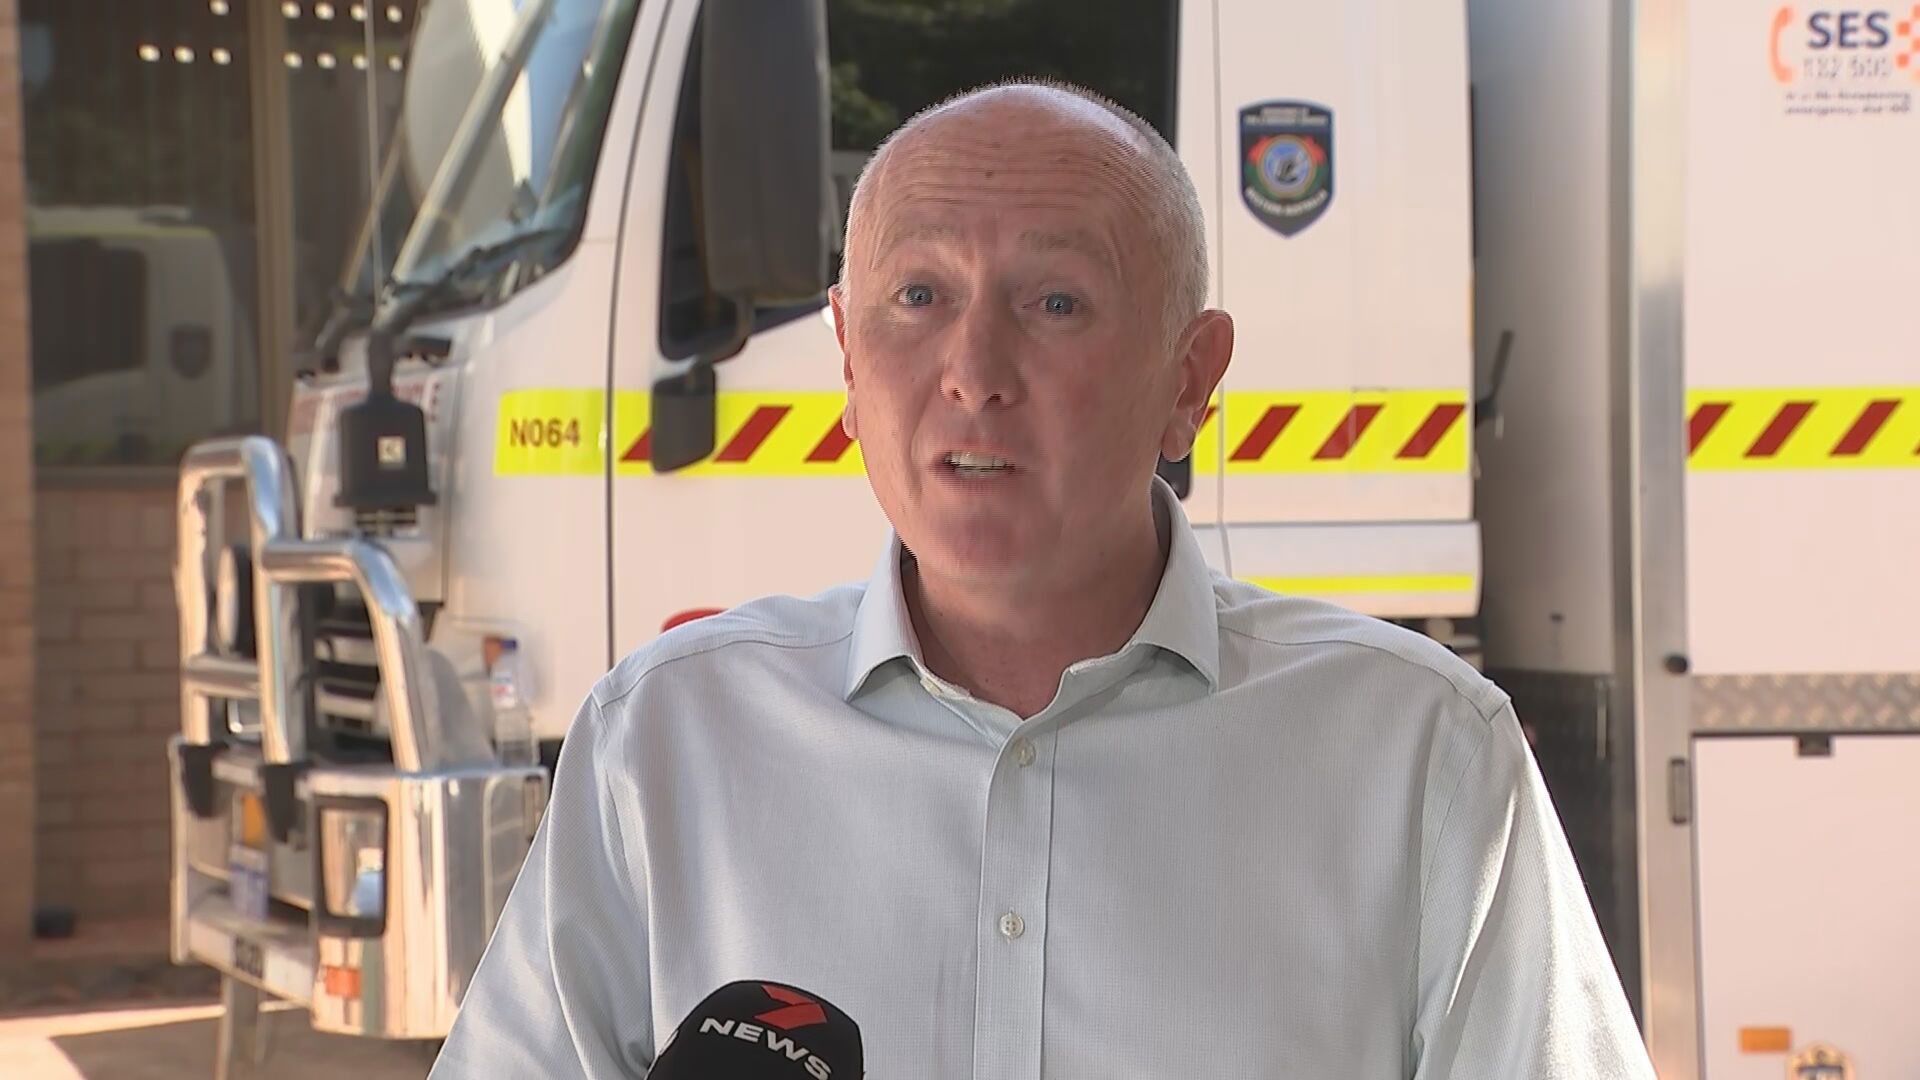 WA Emergency Services Minister Stephen Dawson said it may be unsafe for residents to return home permanently "for some time".